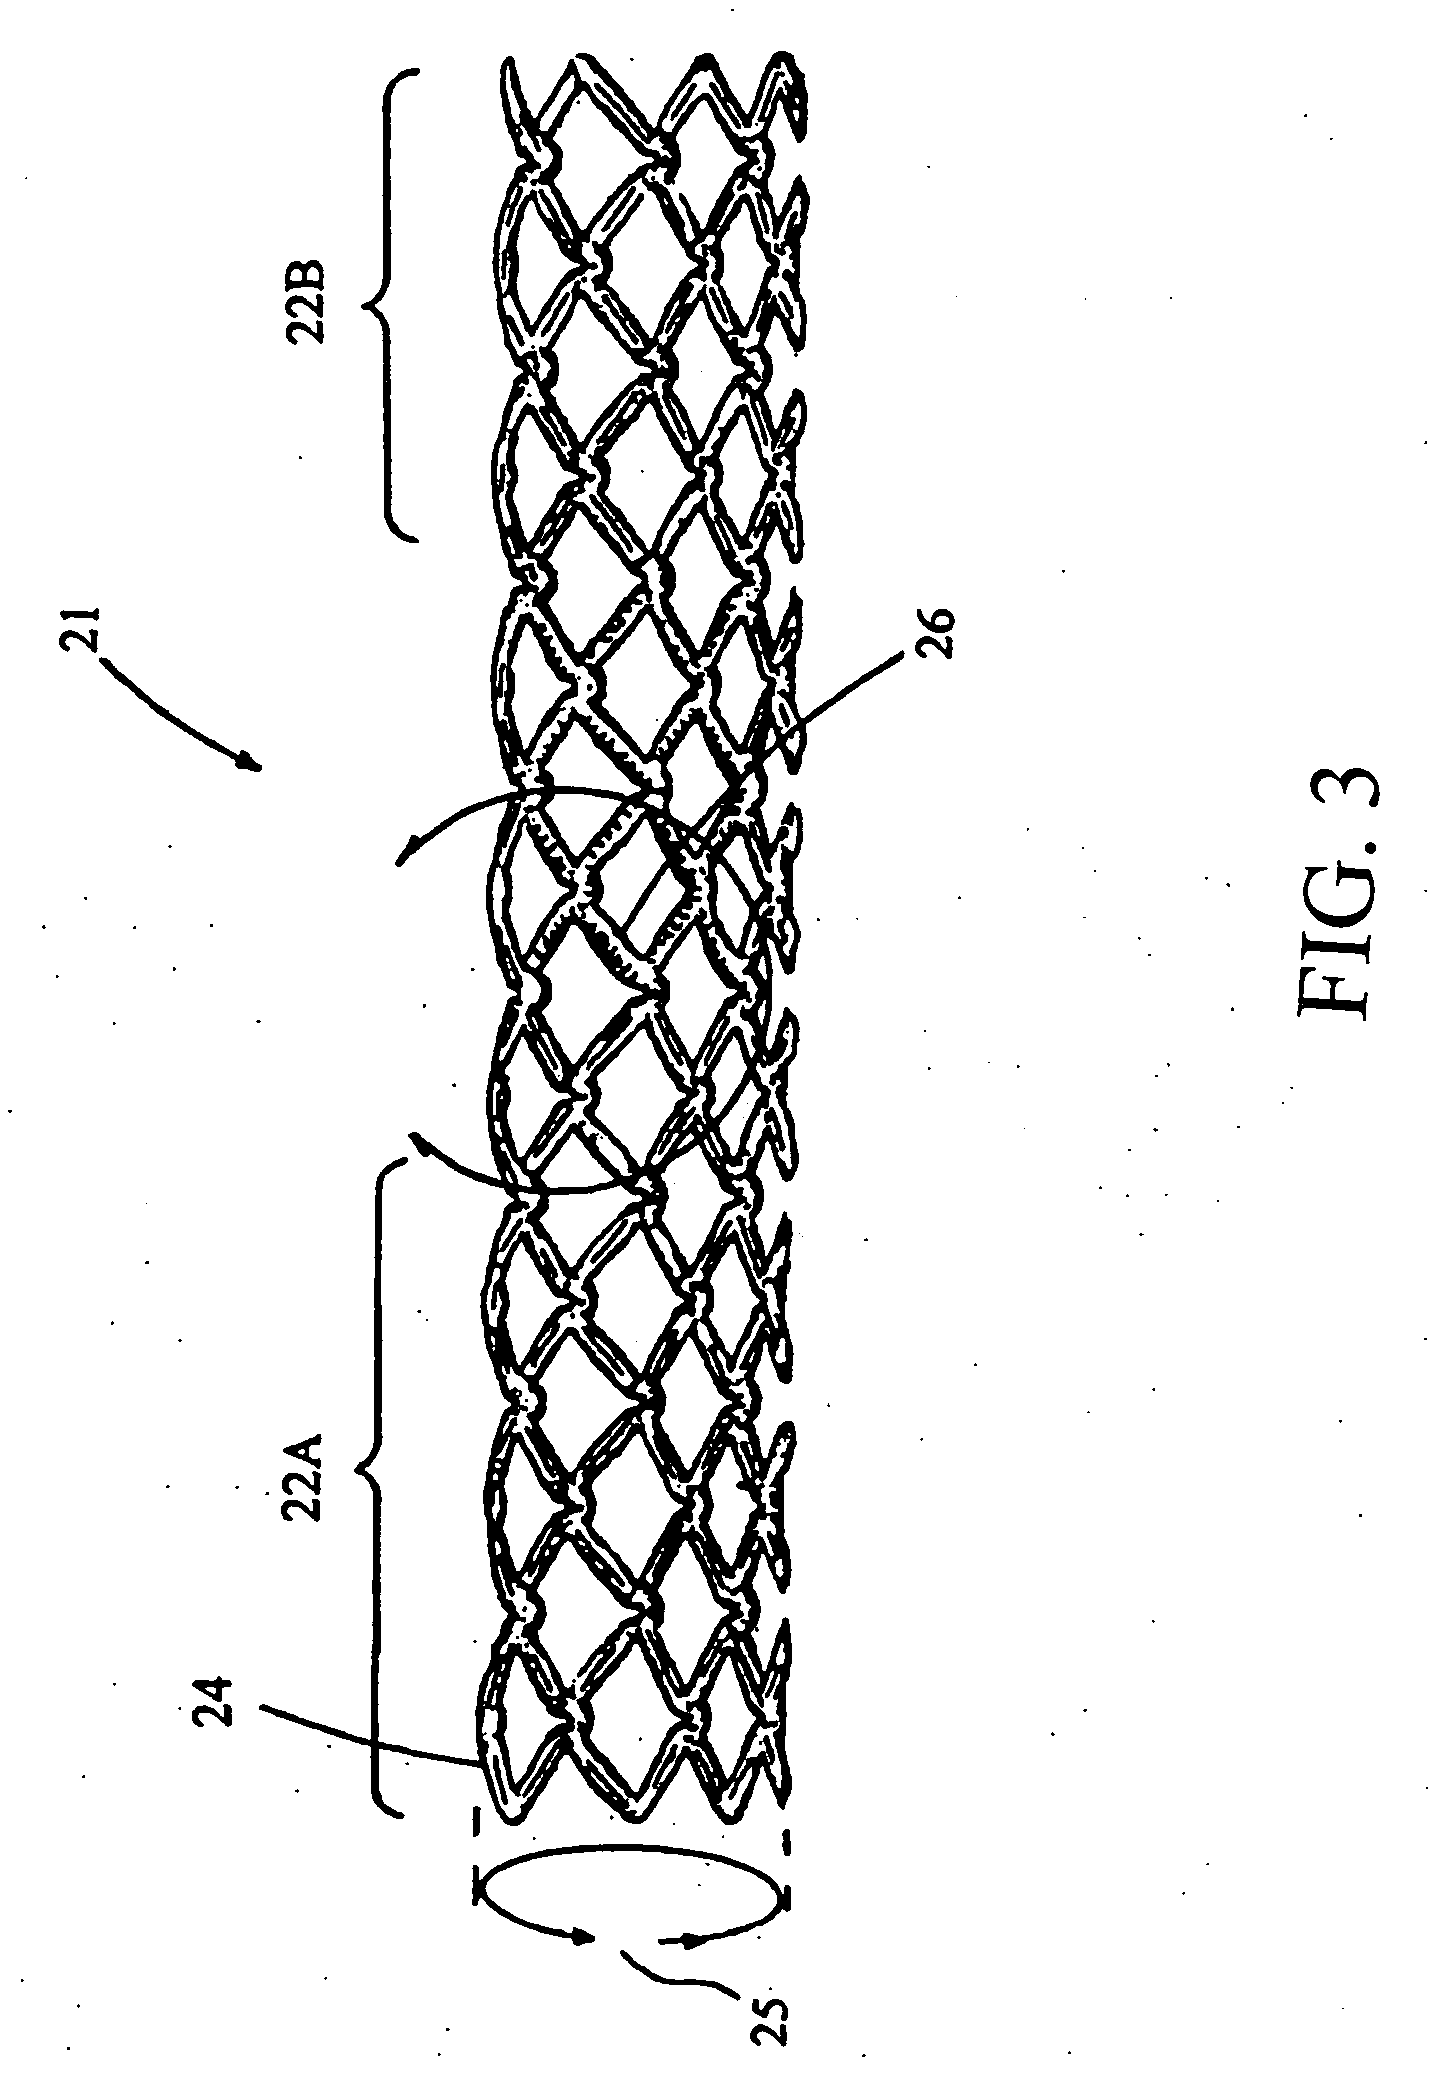 Biodegradable occlusive device with moisture memory